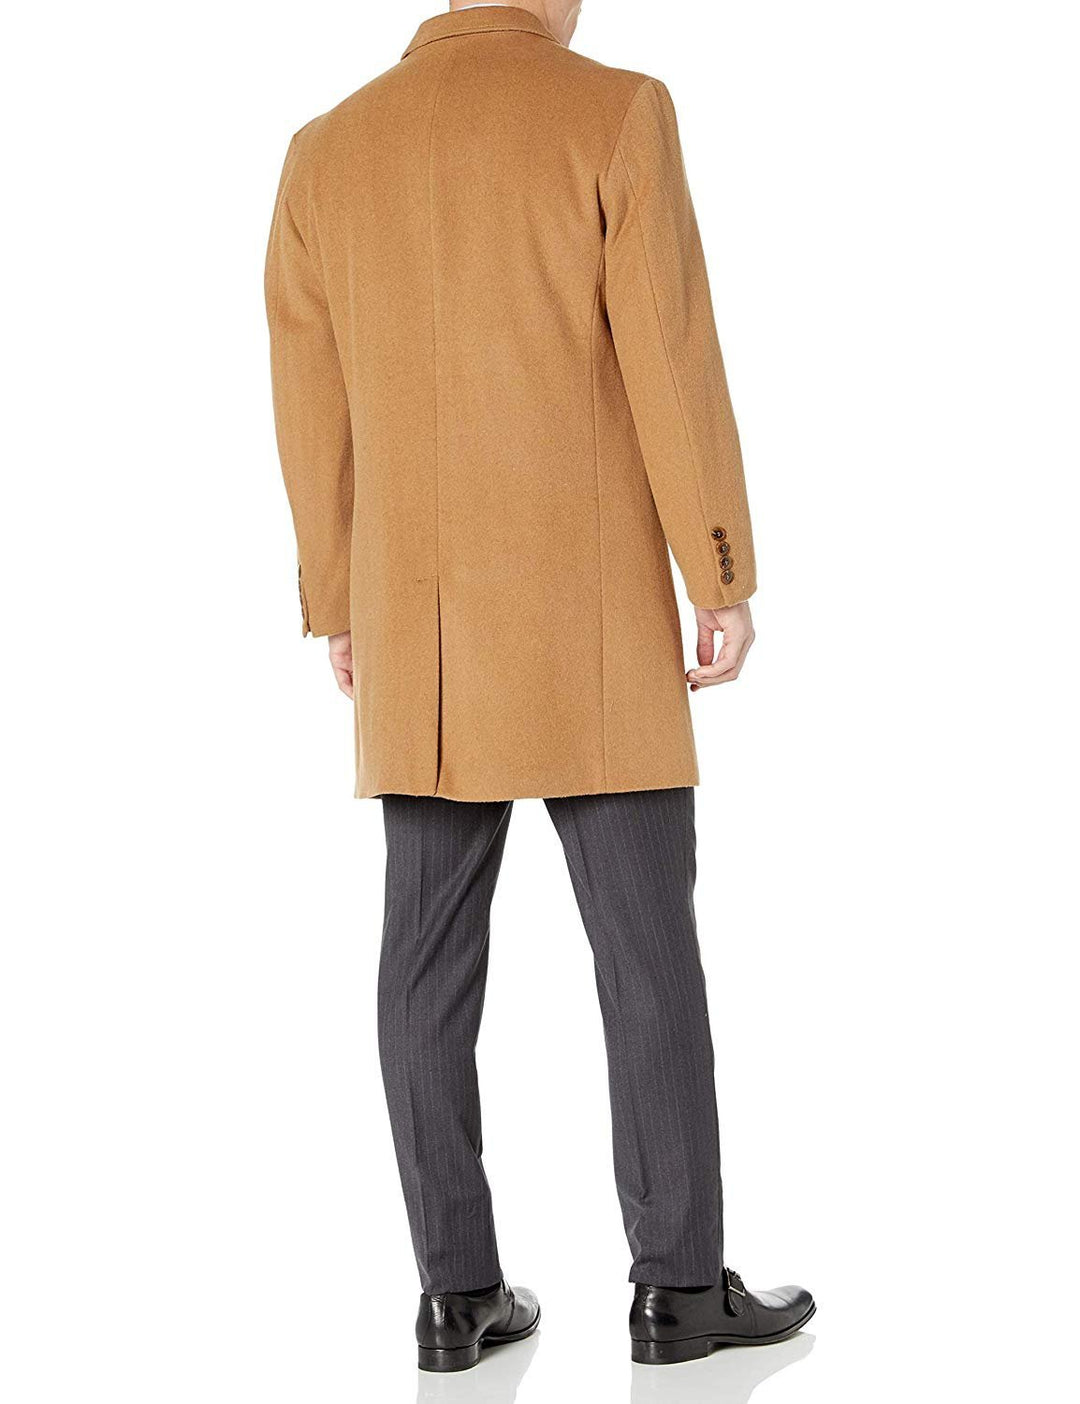 Adam Baker Men's Double Breasted Wool/Cashmere Topcoat - Colors